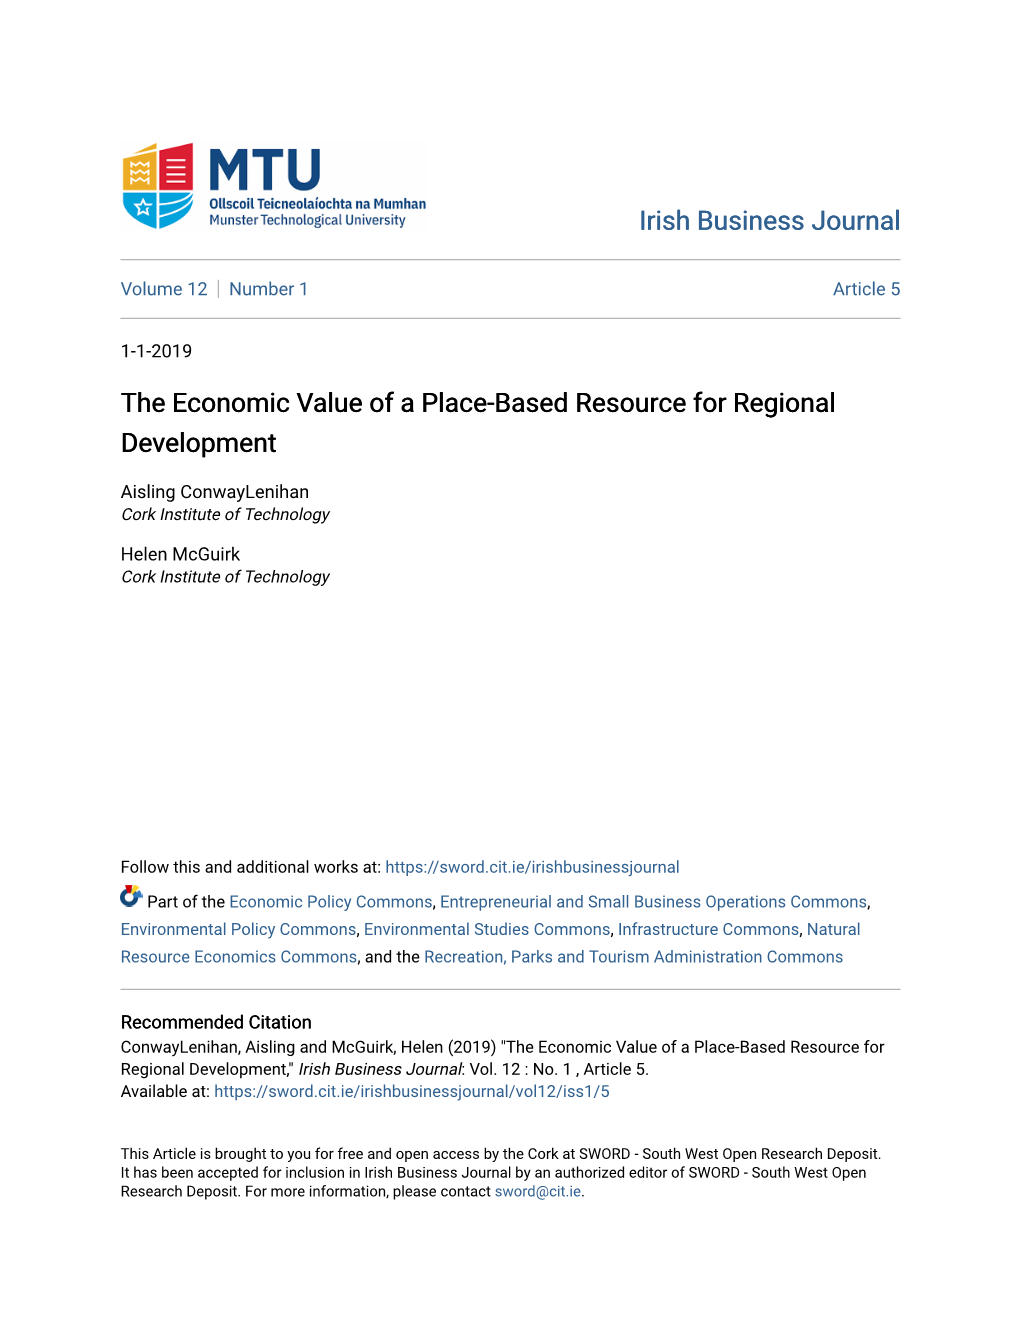 The Economic Value of a Place-Based Resource for Regional Development